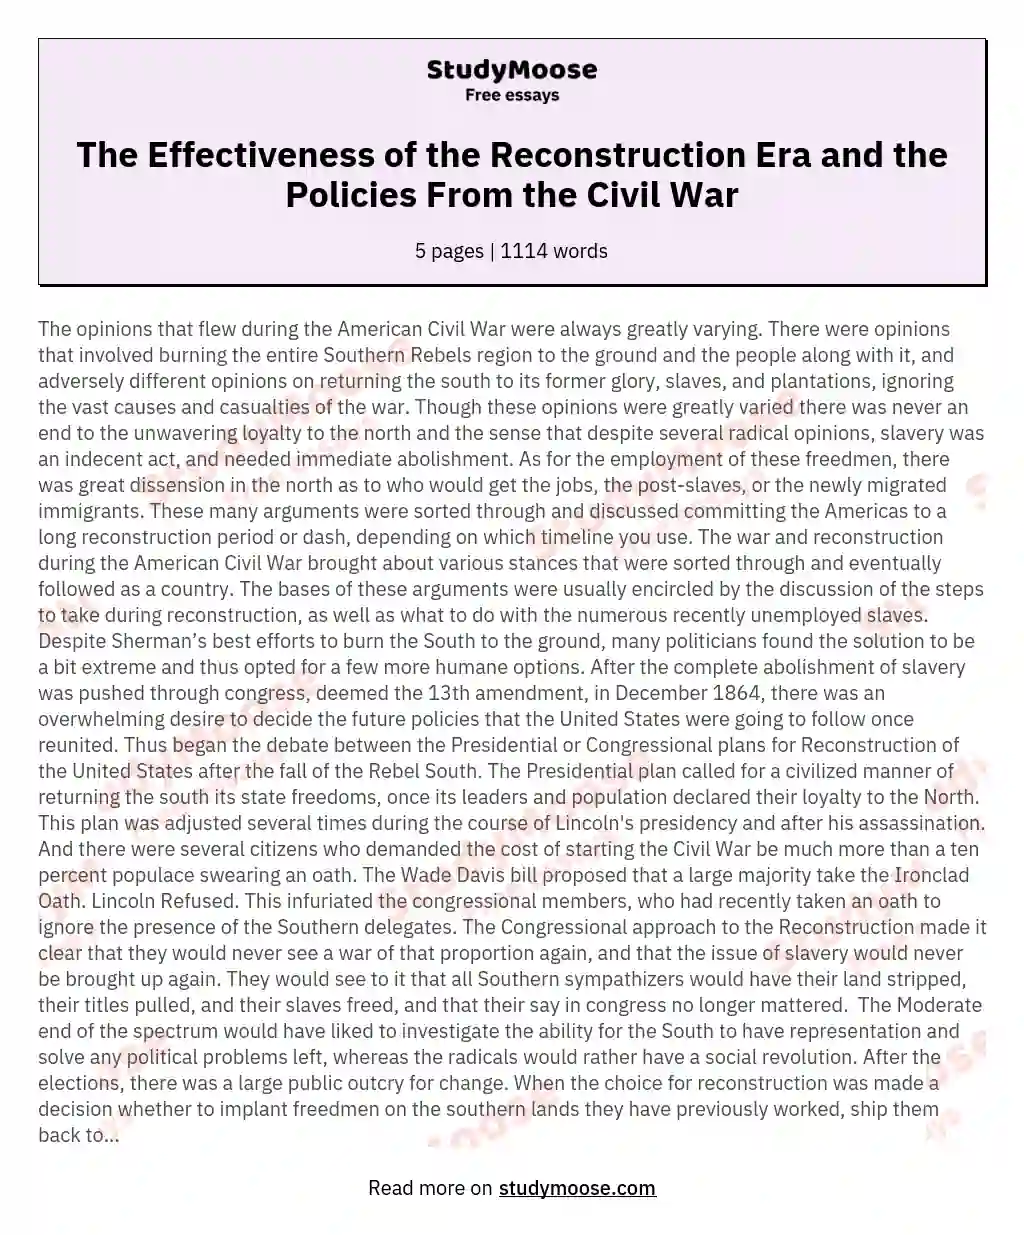 The Effectiveness of the Reconstruction Era and the Policies From the Civil War essay